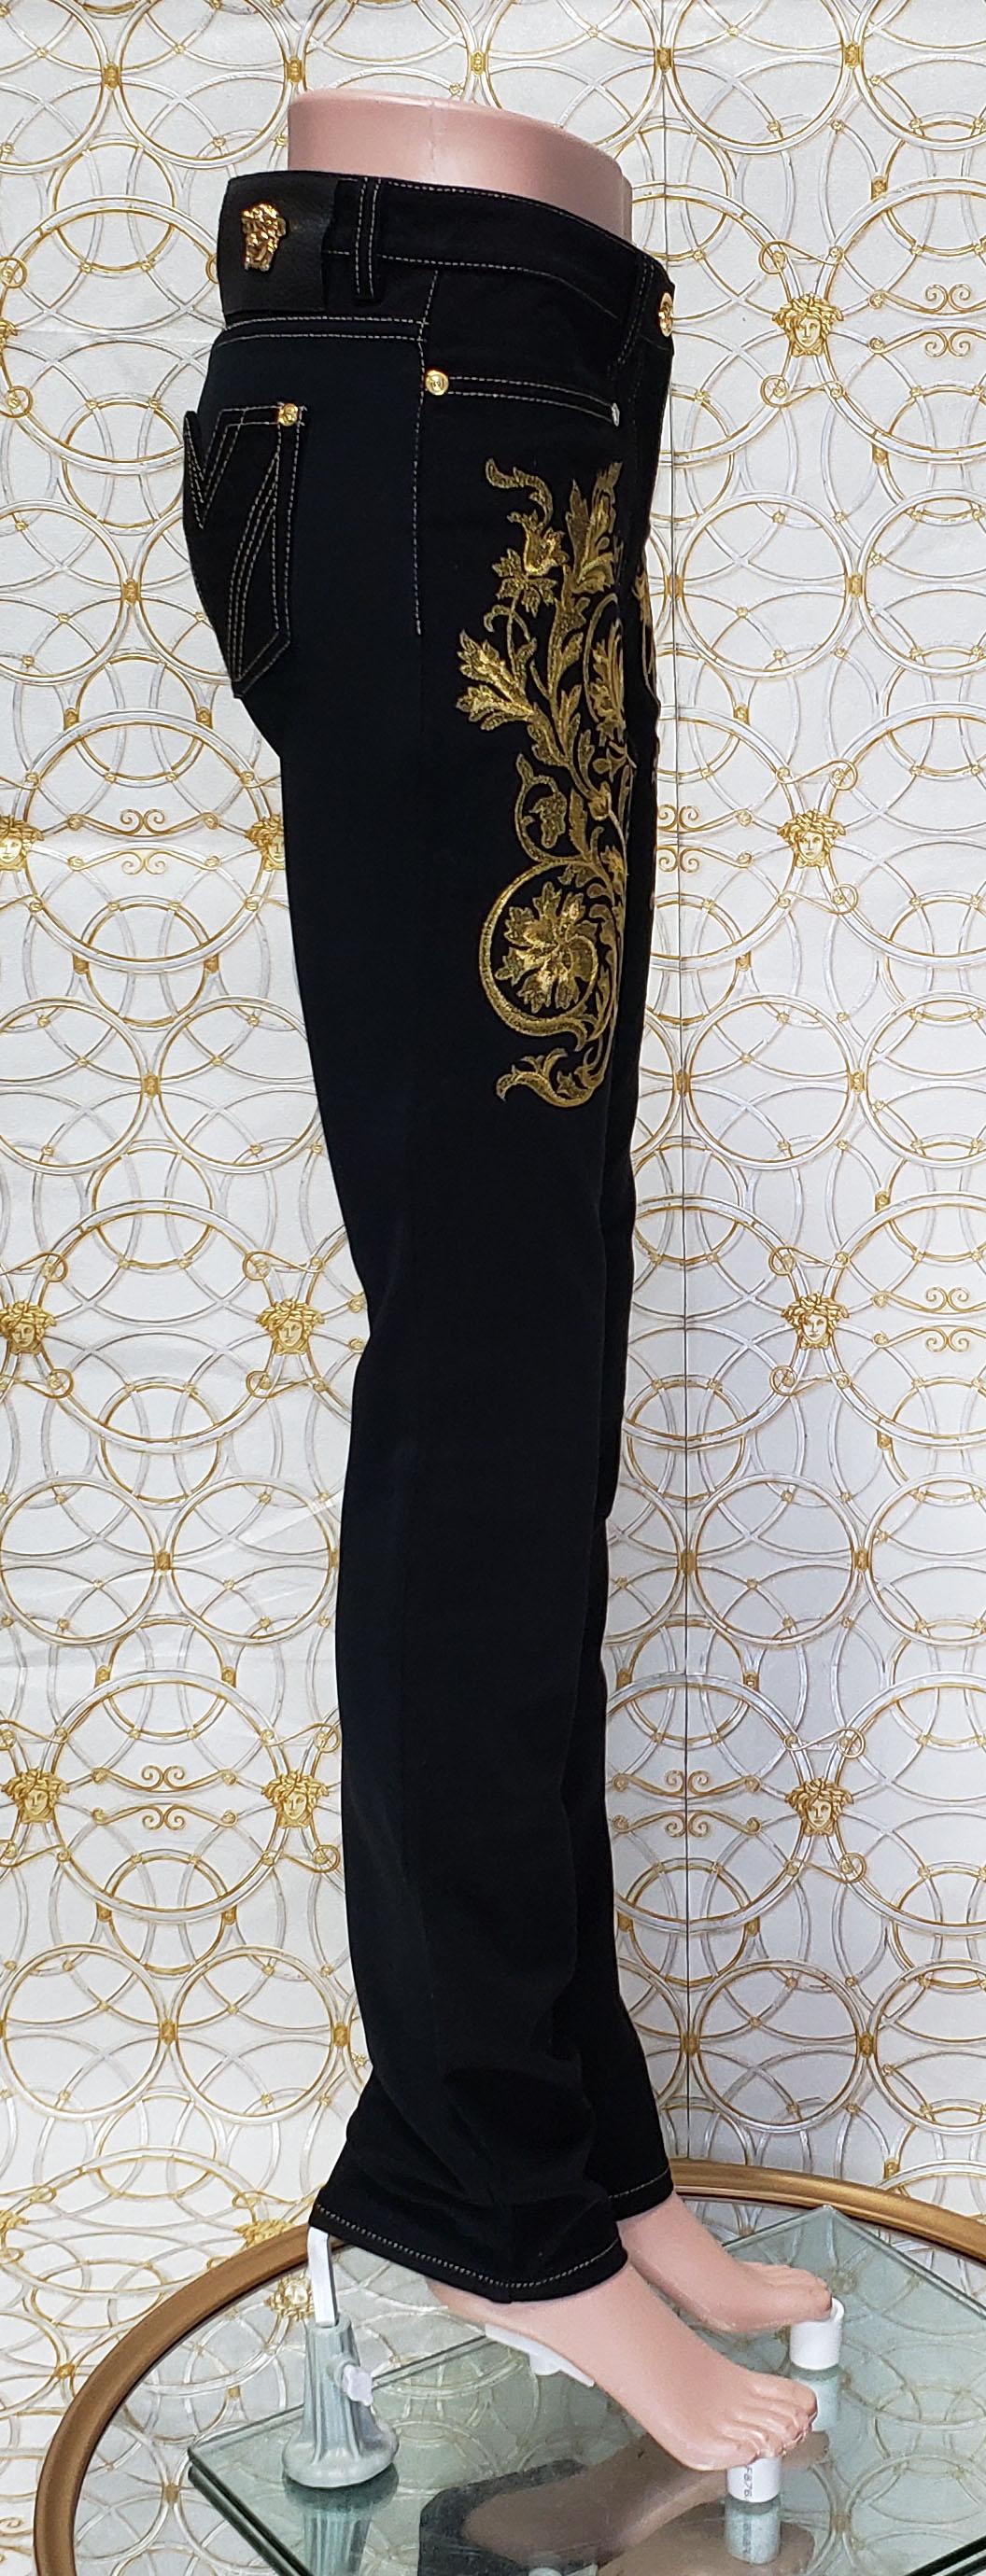 Pre-Fall 2013 L # 2 BRAND NEW VERSACE BAROQUE GOLD EMBROIDERED JEANS size 26 For Sale 5